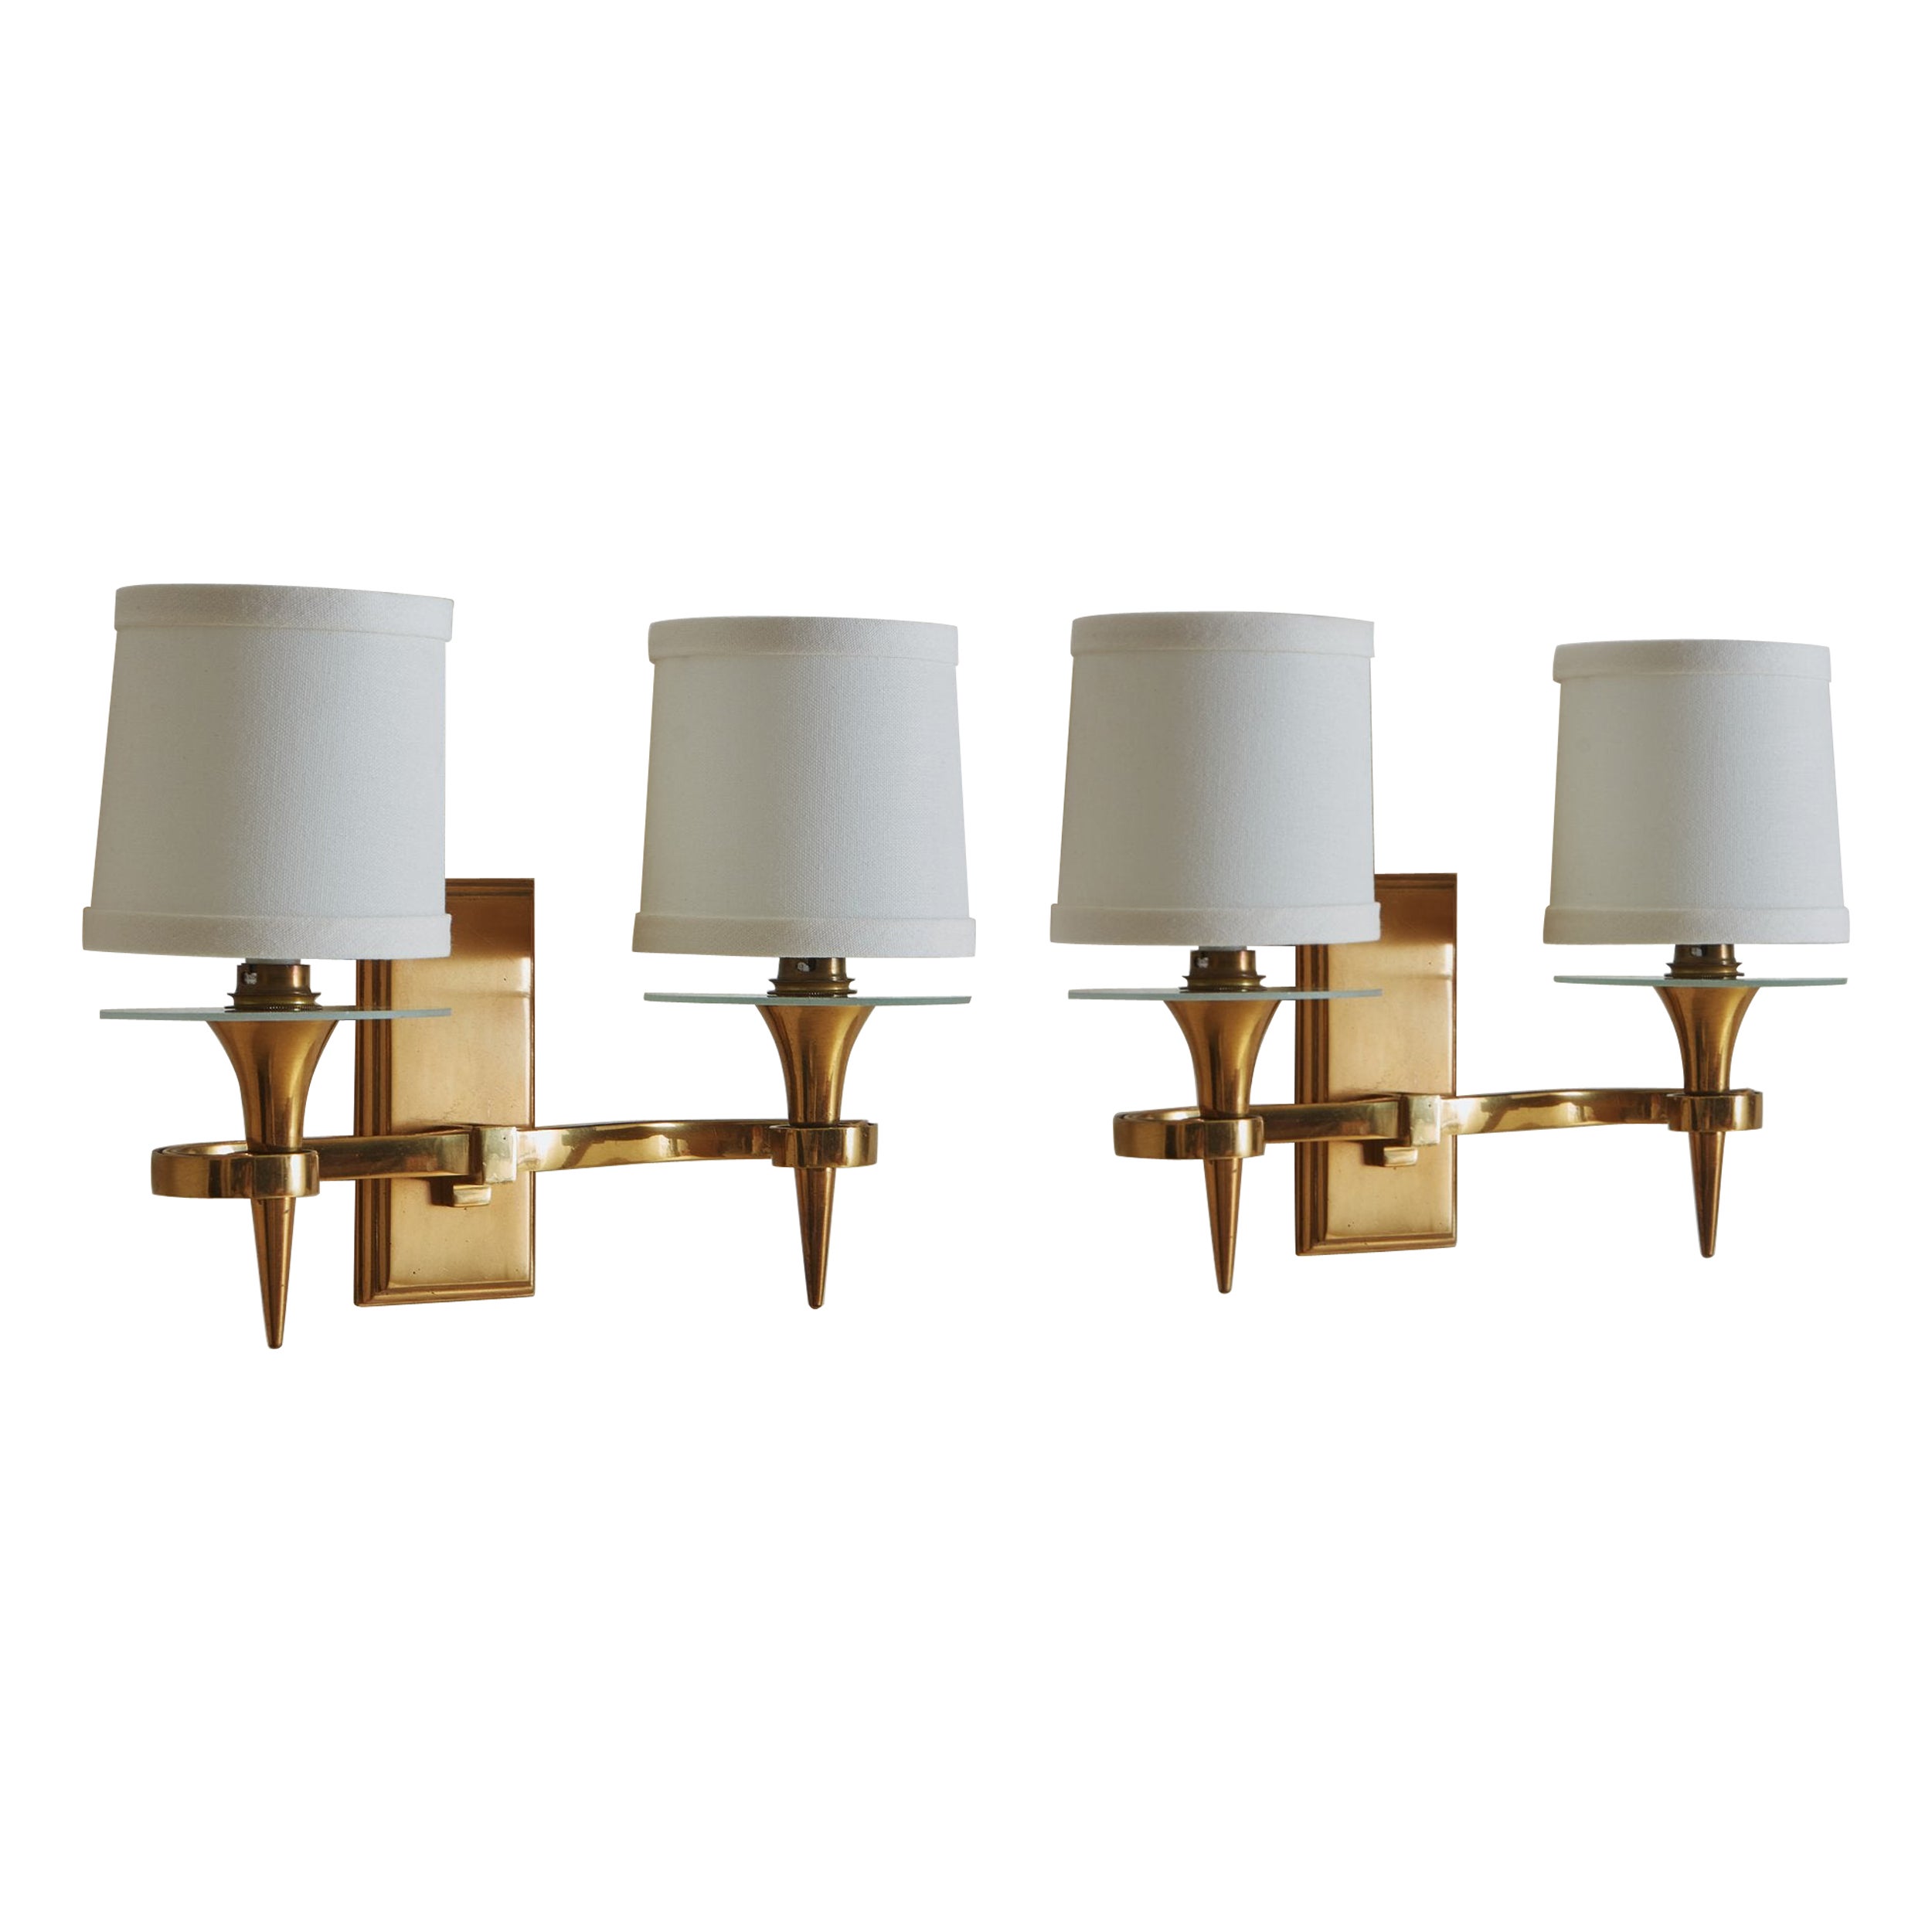 Pair of Brass Torch Sconces with Shades, France 1940s For Sale